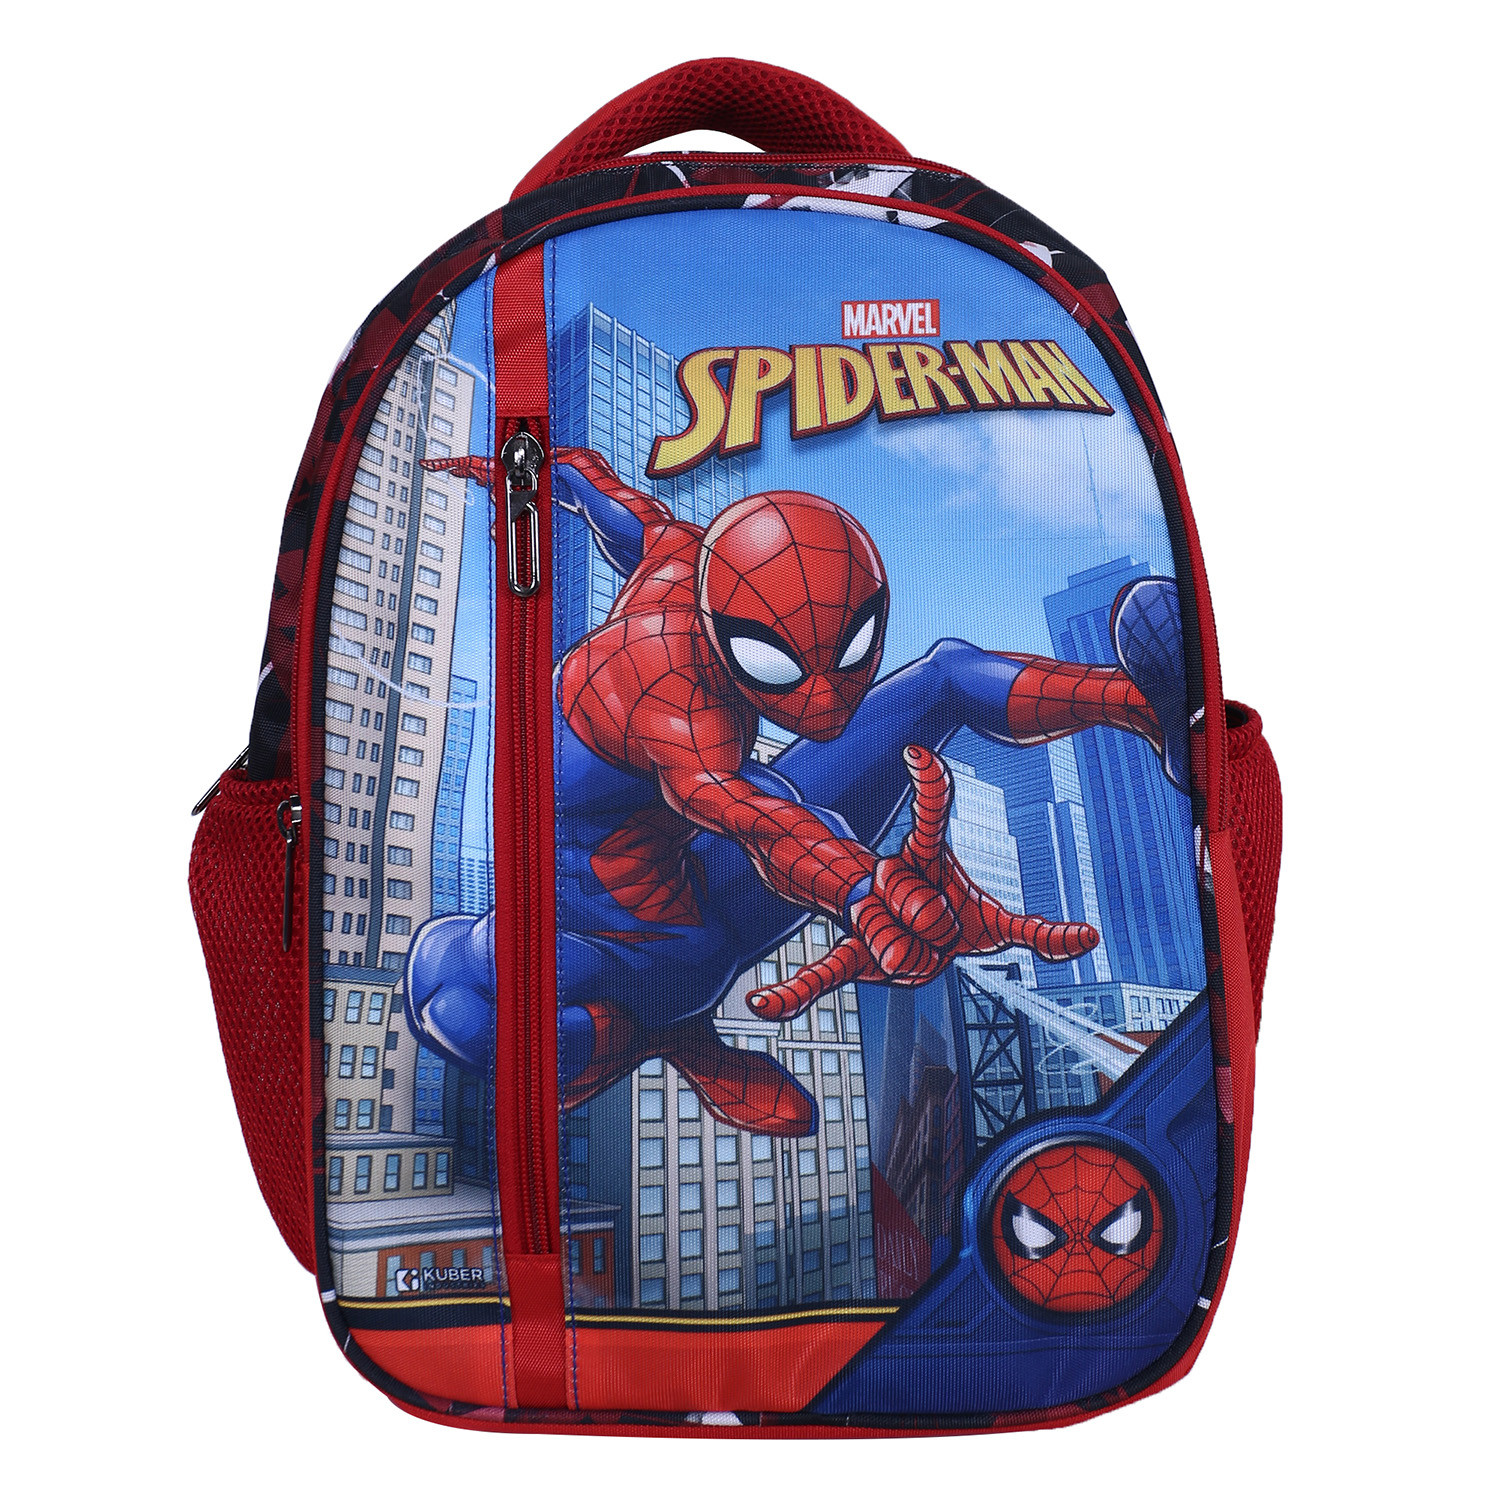 Kuber Industries Marvel Spiderman Backpack|4 Compartment School Bags for kids|Durable School Bags for Boy Travel,School with Zipper Closure (Red)